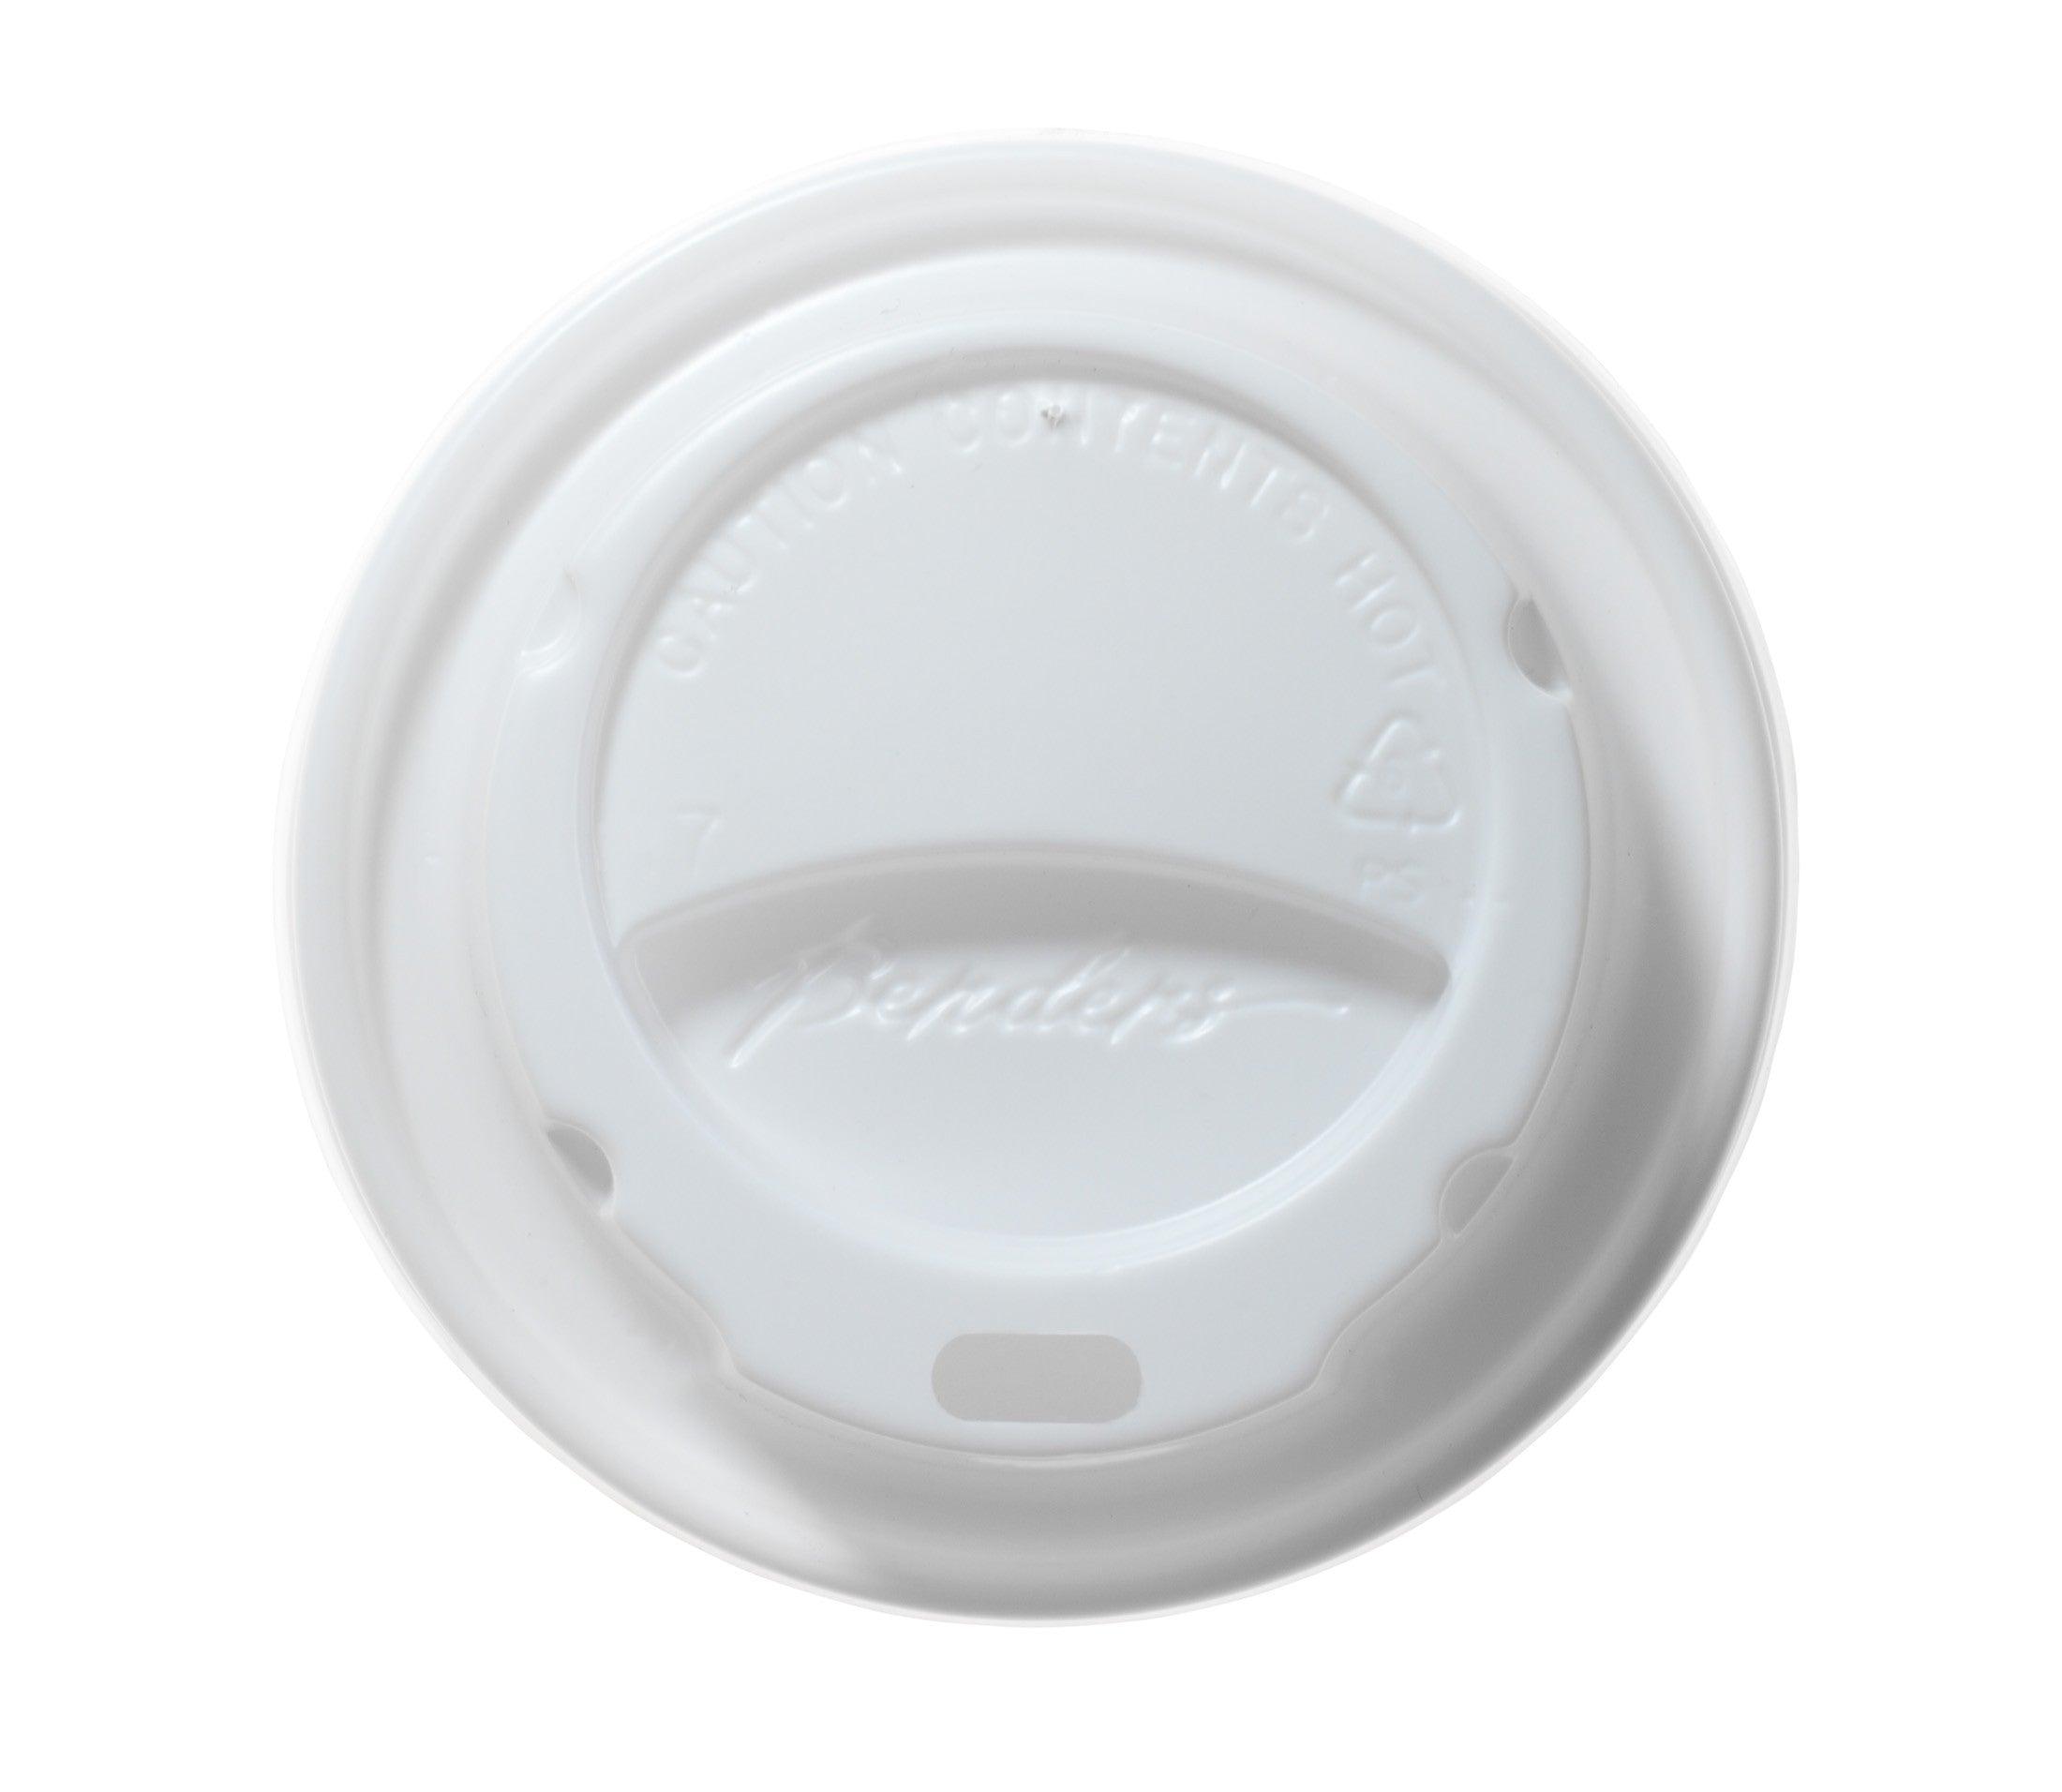 9oz White Sip Through Lids For 9oz Paper Vending Cups - Sleeve Of 100 - Vending Superstore